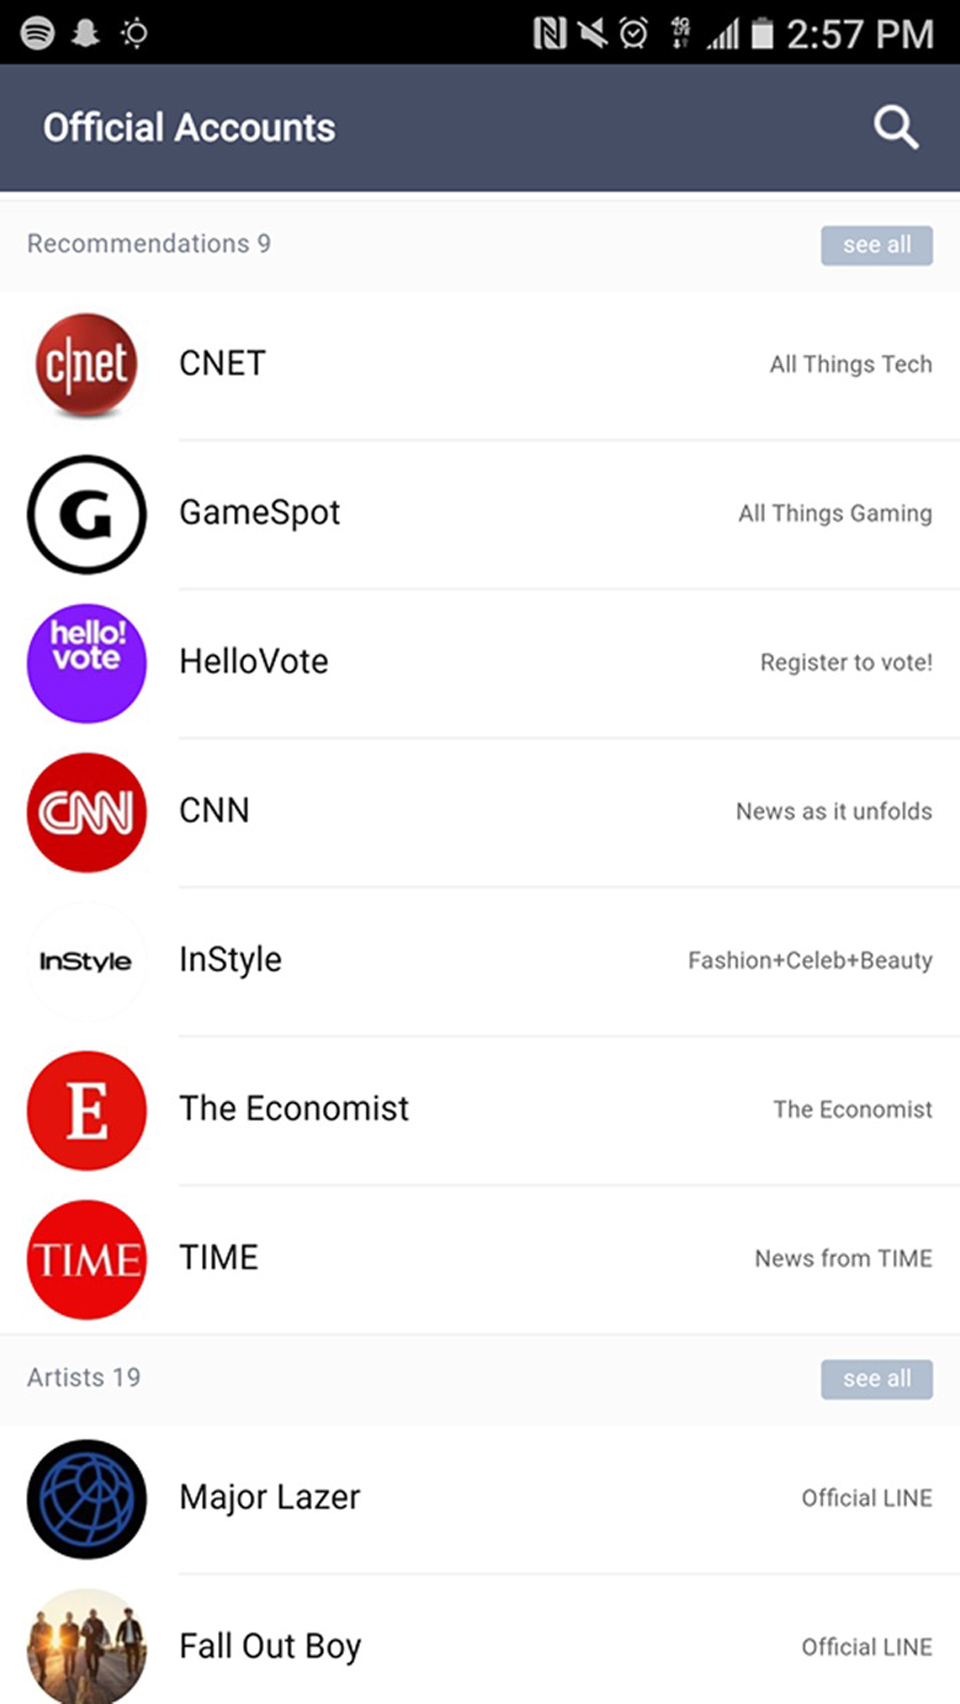 A List Of Brands Who Created Social Interaction Apps Such As CNET, HelloVote, TIME, Major Lazer